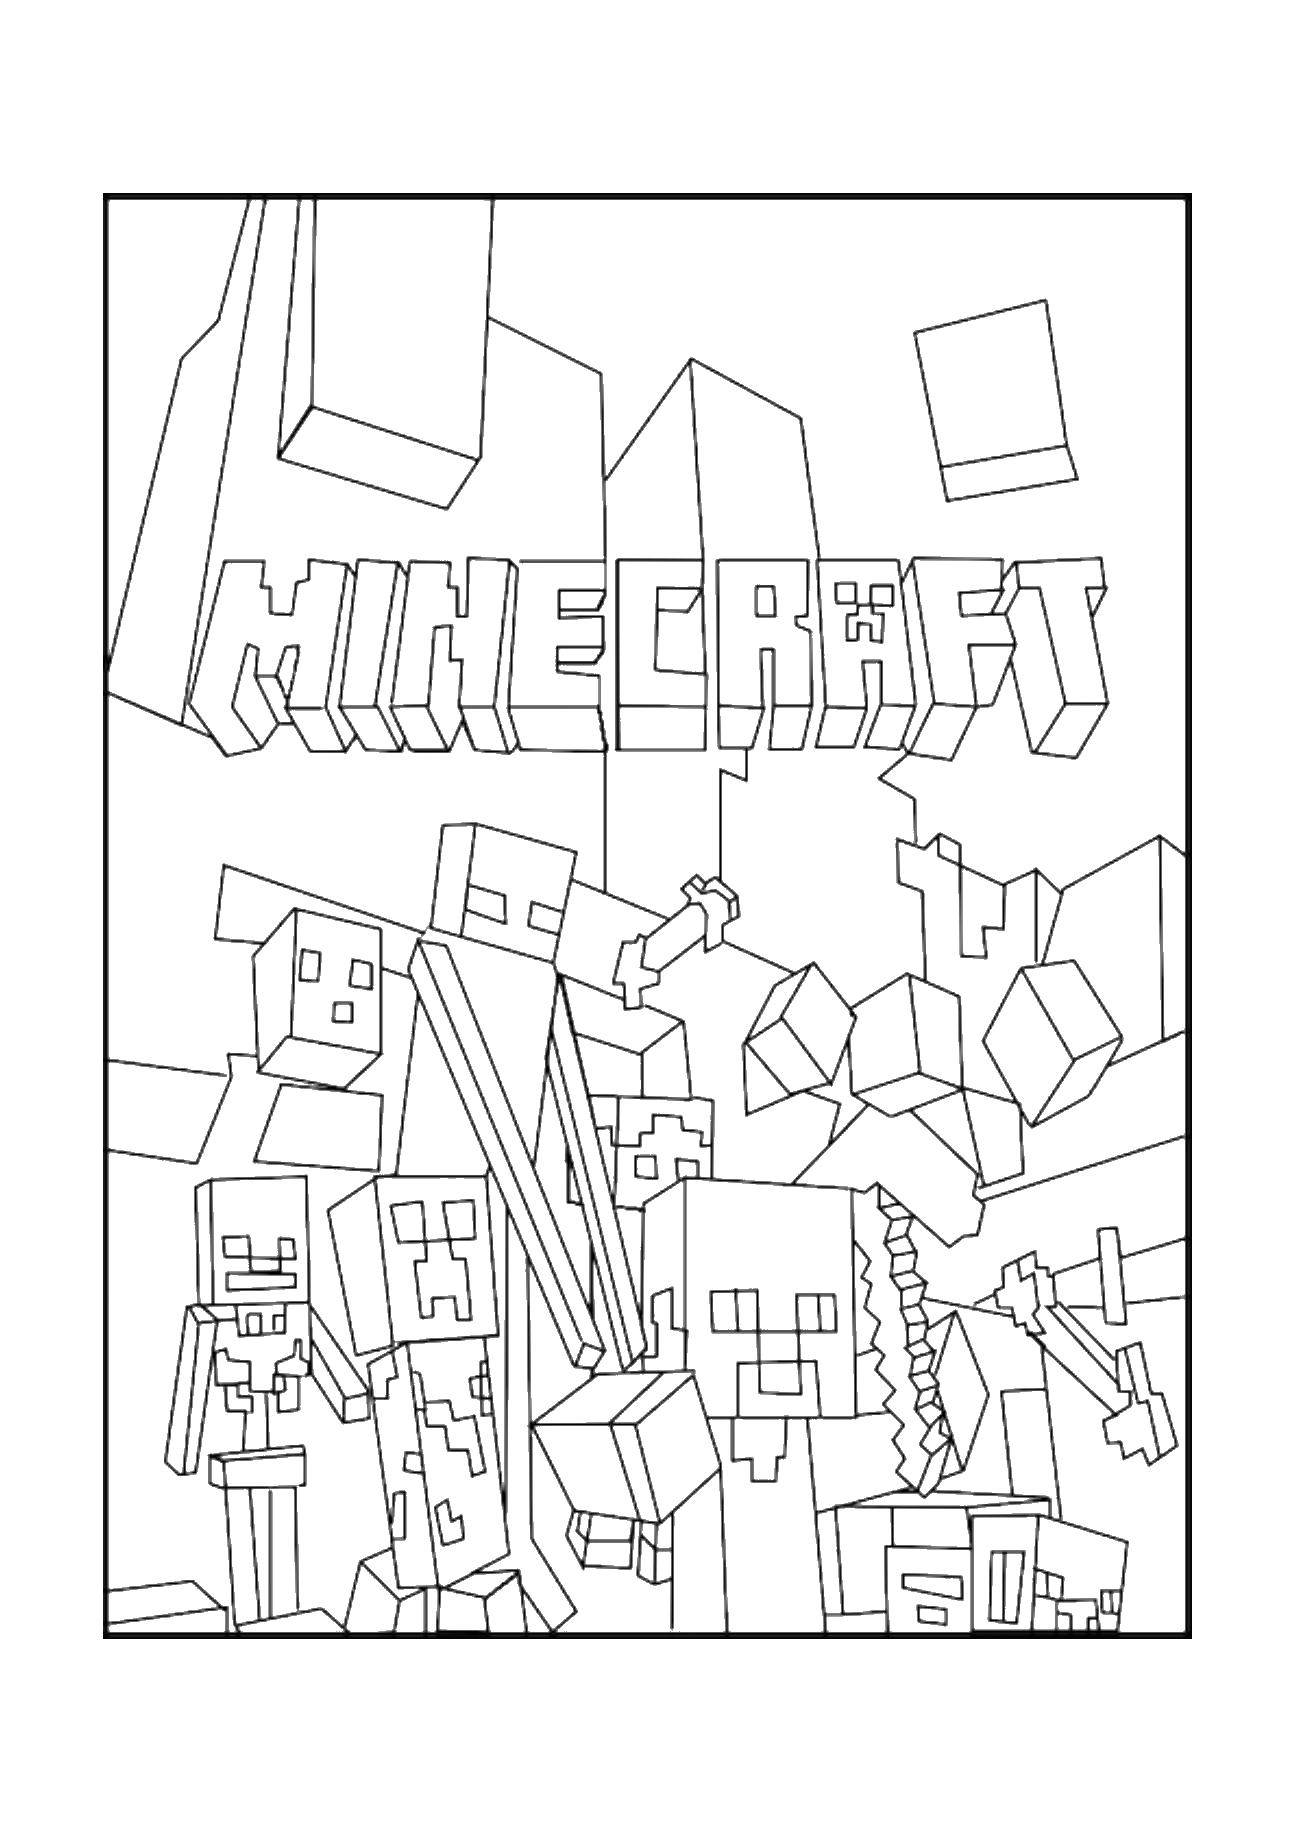 Coloring The world of minecraft.. Category minecraft. Tags:  Games, Minecraft.